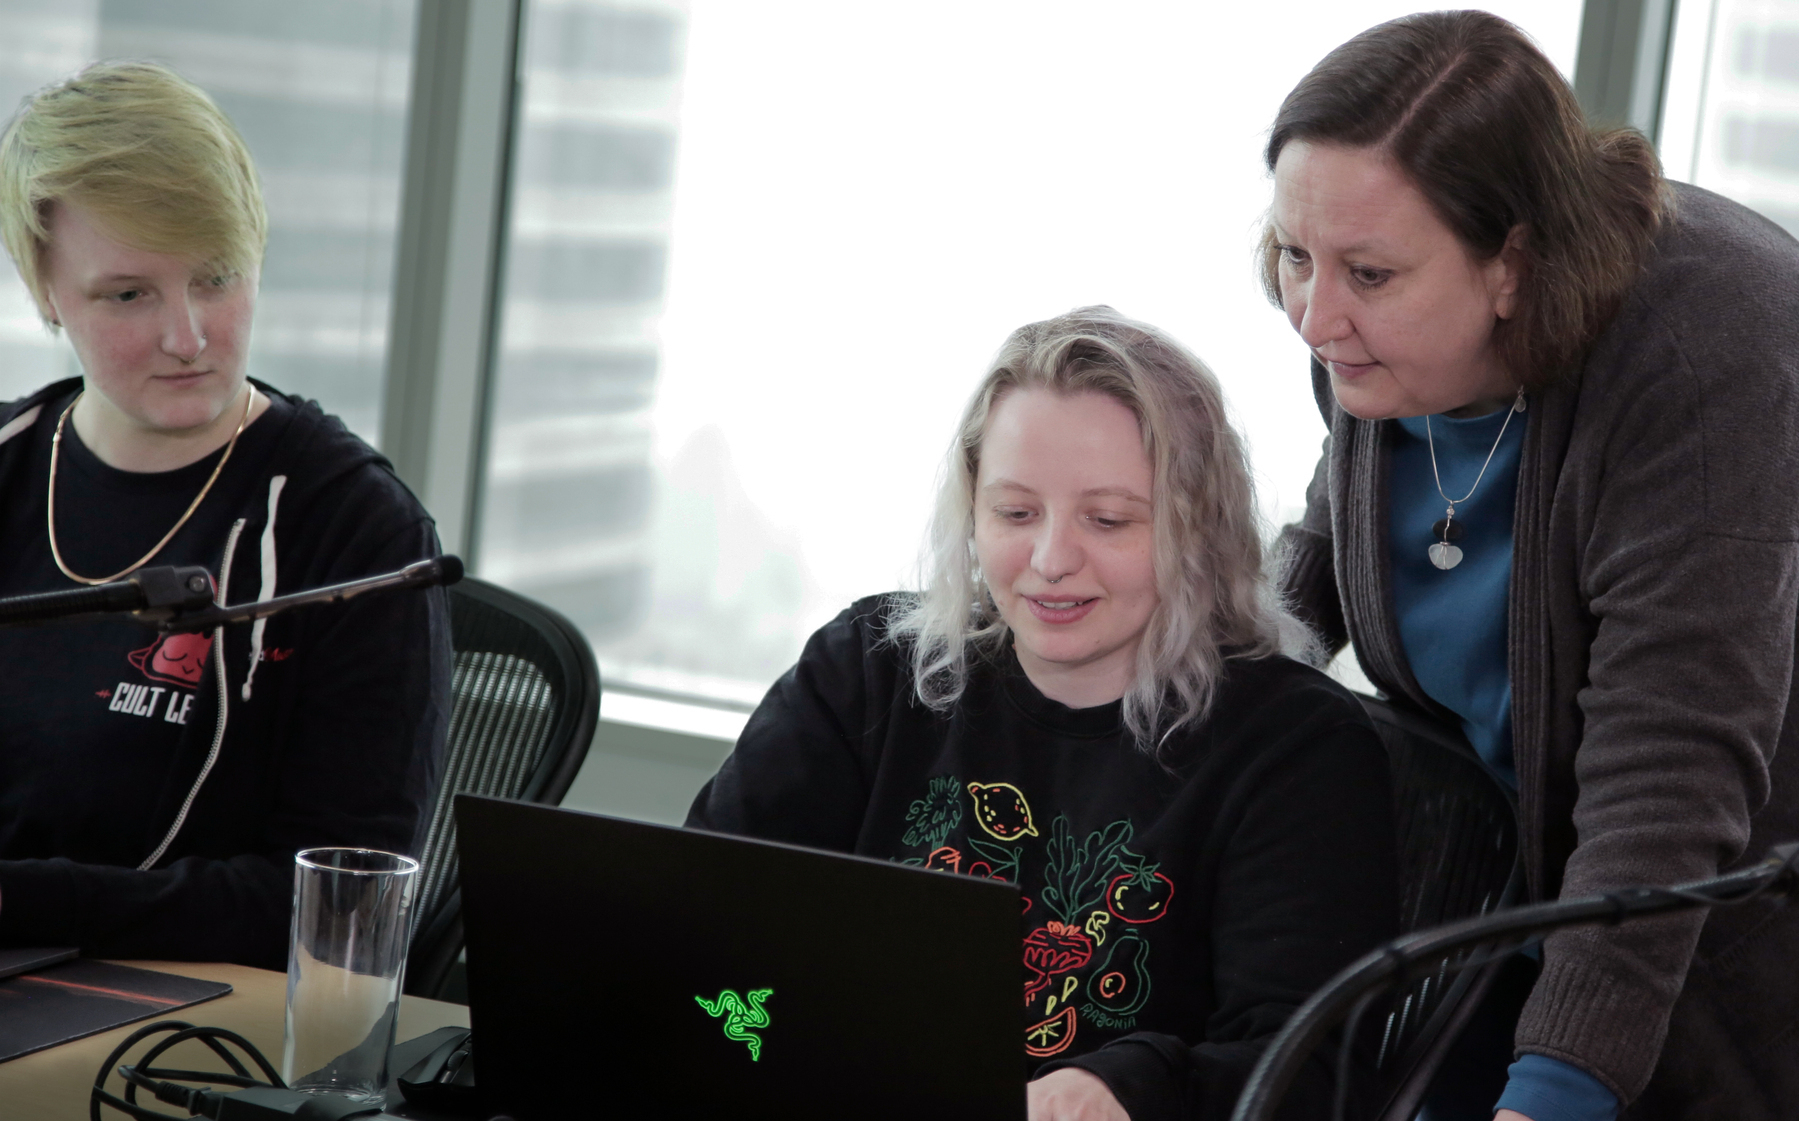 Jen at Frontend Masters, assisting two students with their code.